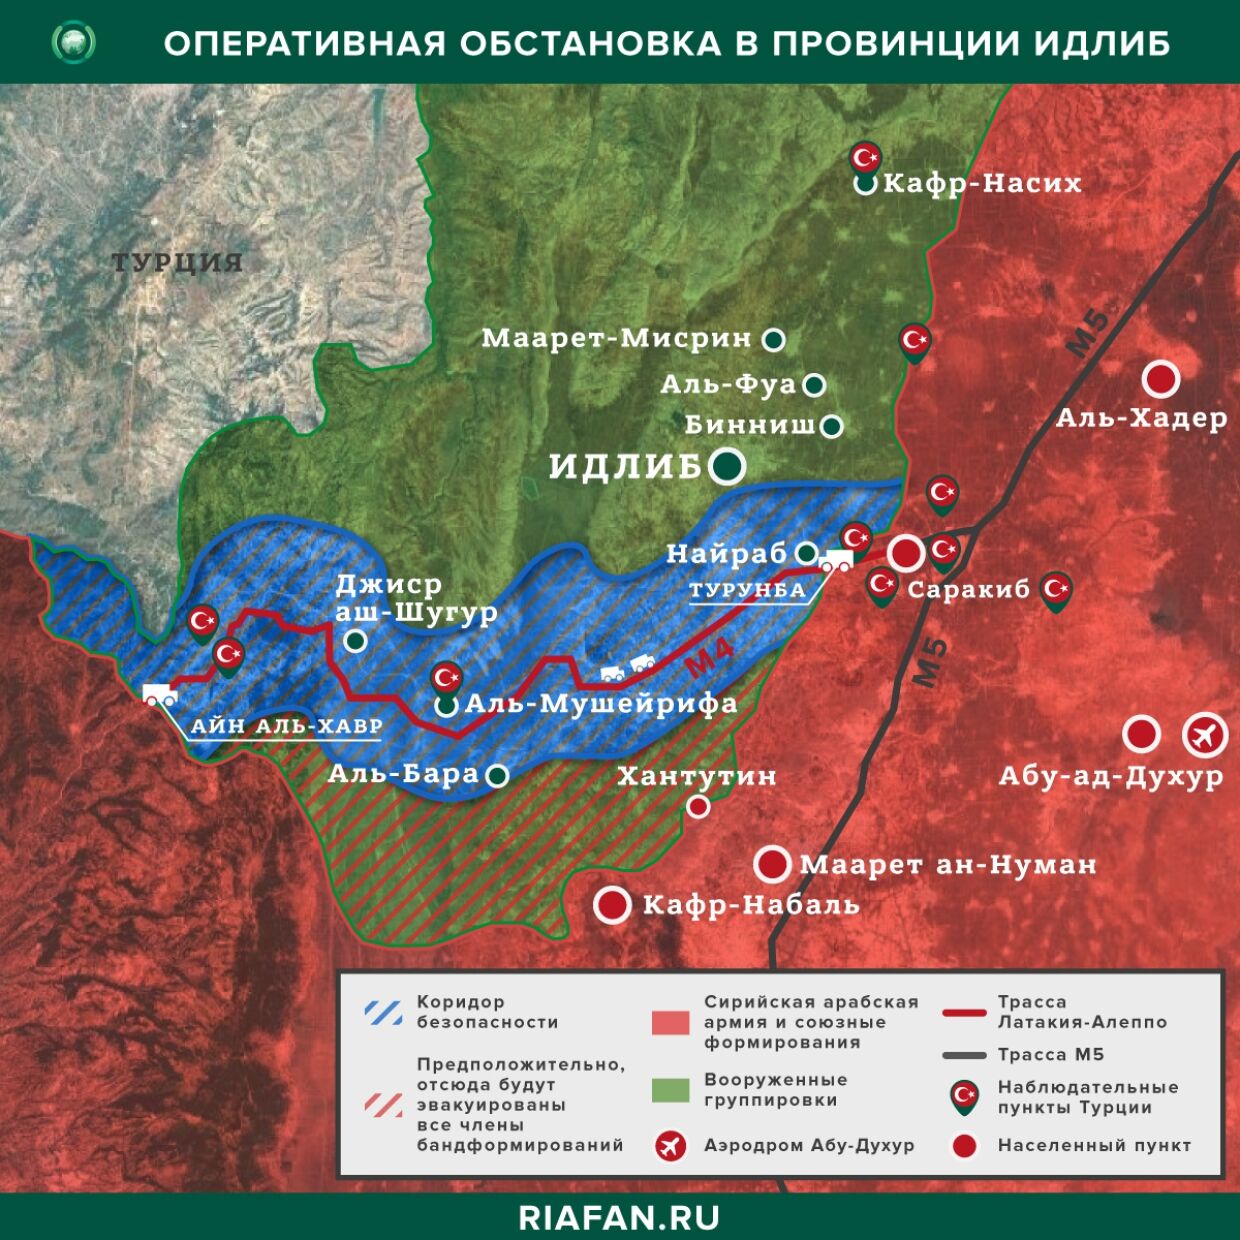 Syria the results of the day on 17 April 06.00: IG * made two sorties in Daria, the explosion in Hasak killed five militants